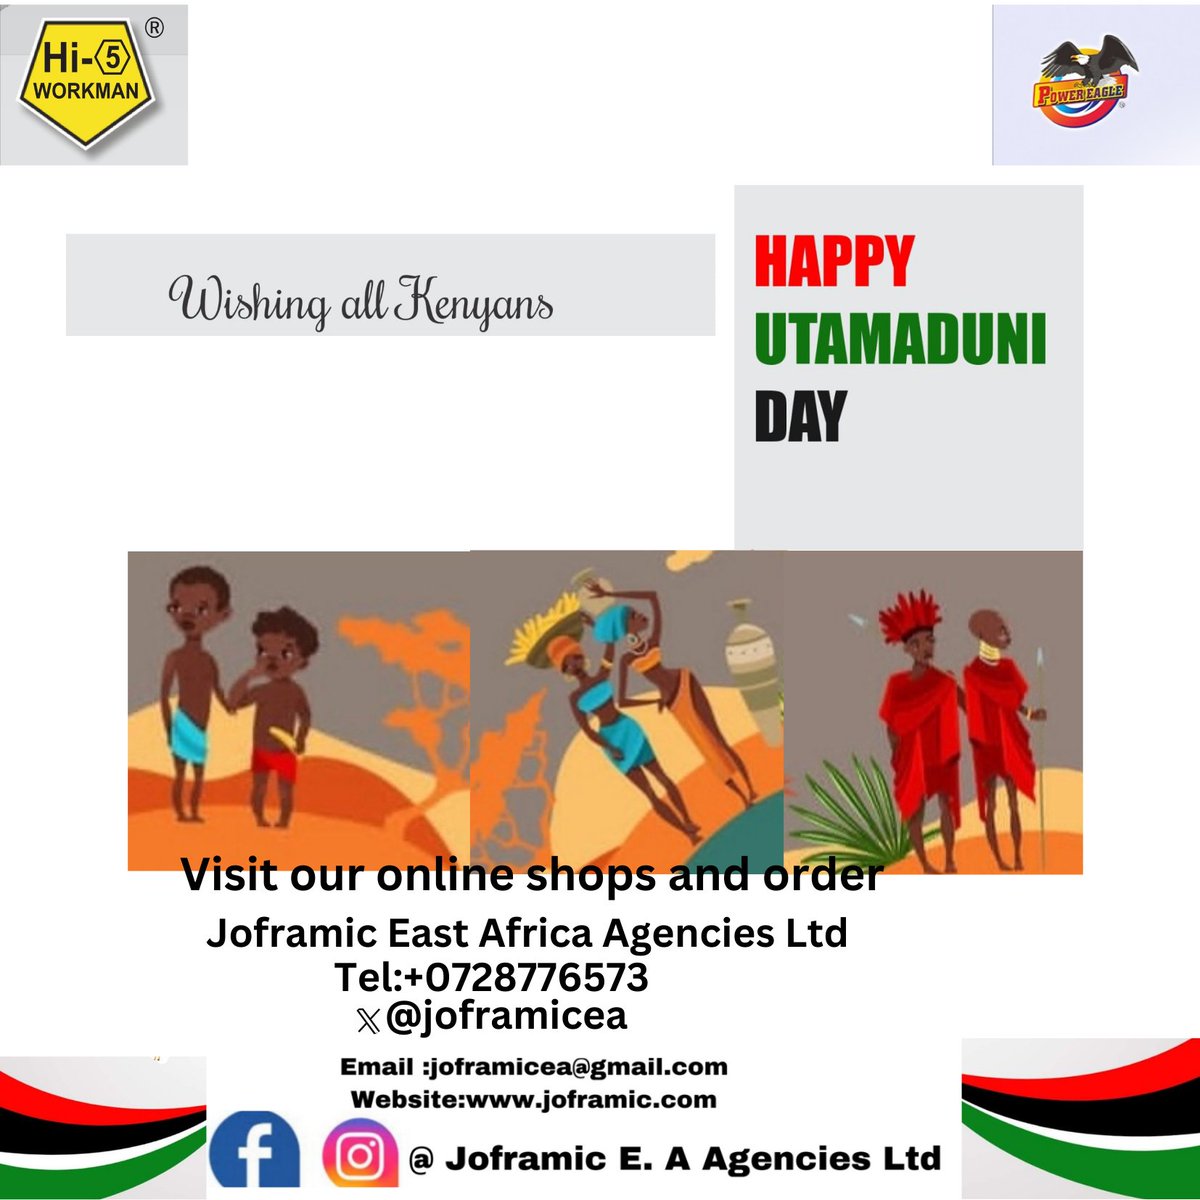 We wish you a happy Utamaduni day. We recognize, celebrate and appreciate our cultural diversity as Kenyans.

#Utamaduni Day#Kenya
#Utamaduniday2023
#Kenyaculture #UnityInDiversity
#culture #Utamaduni